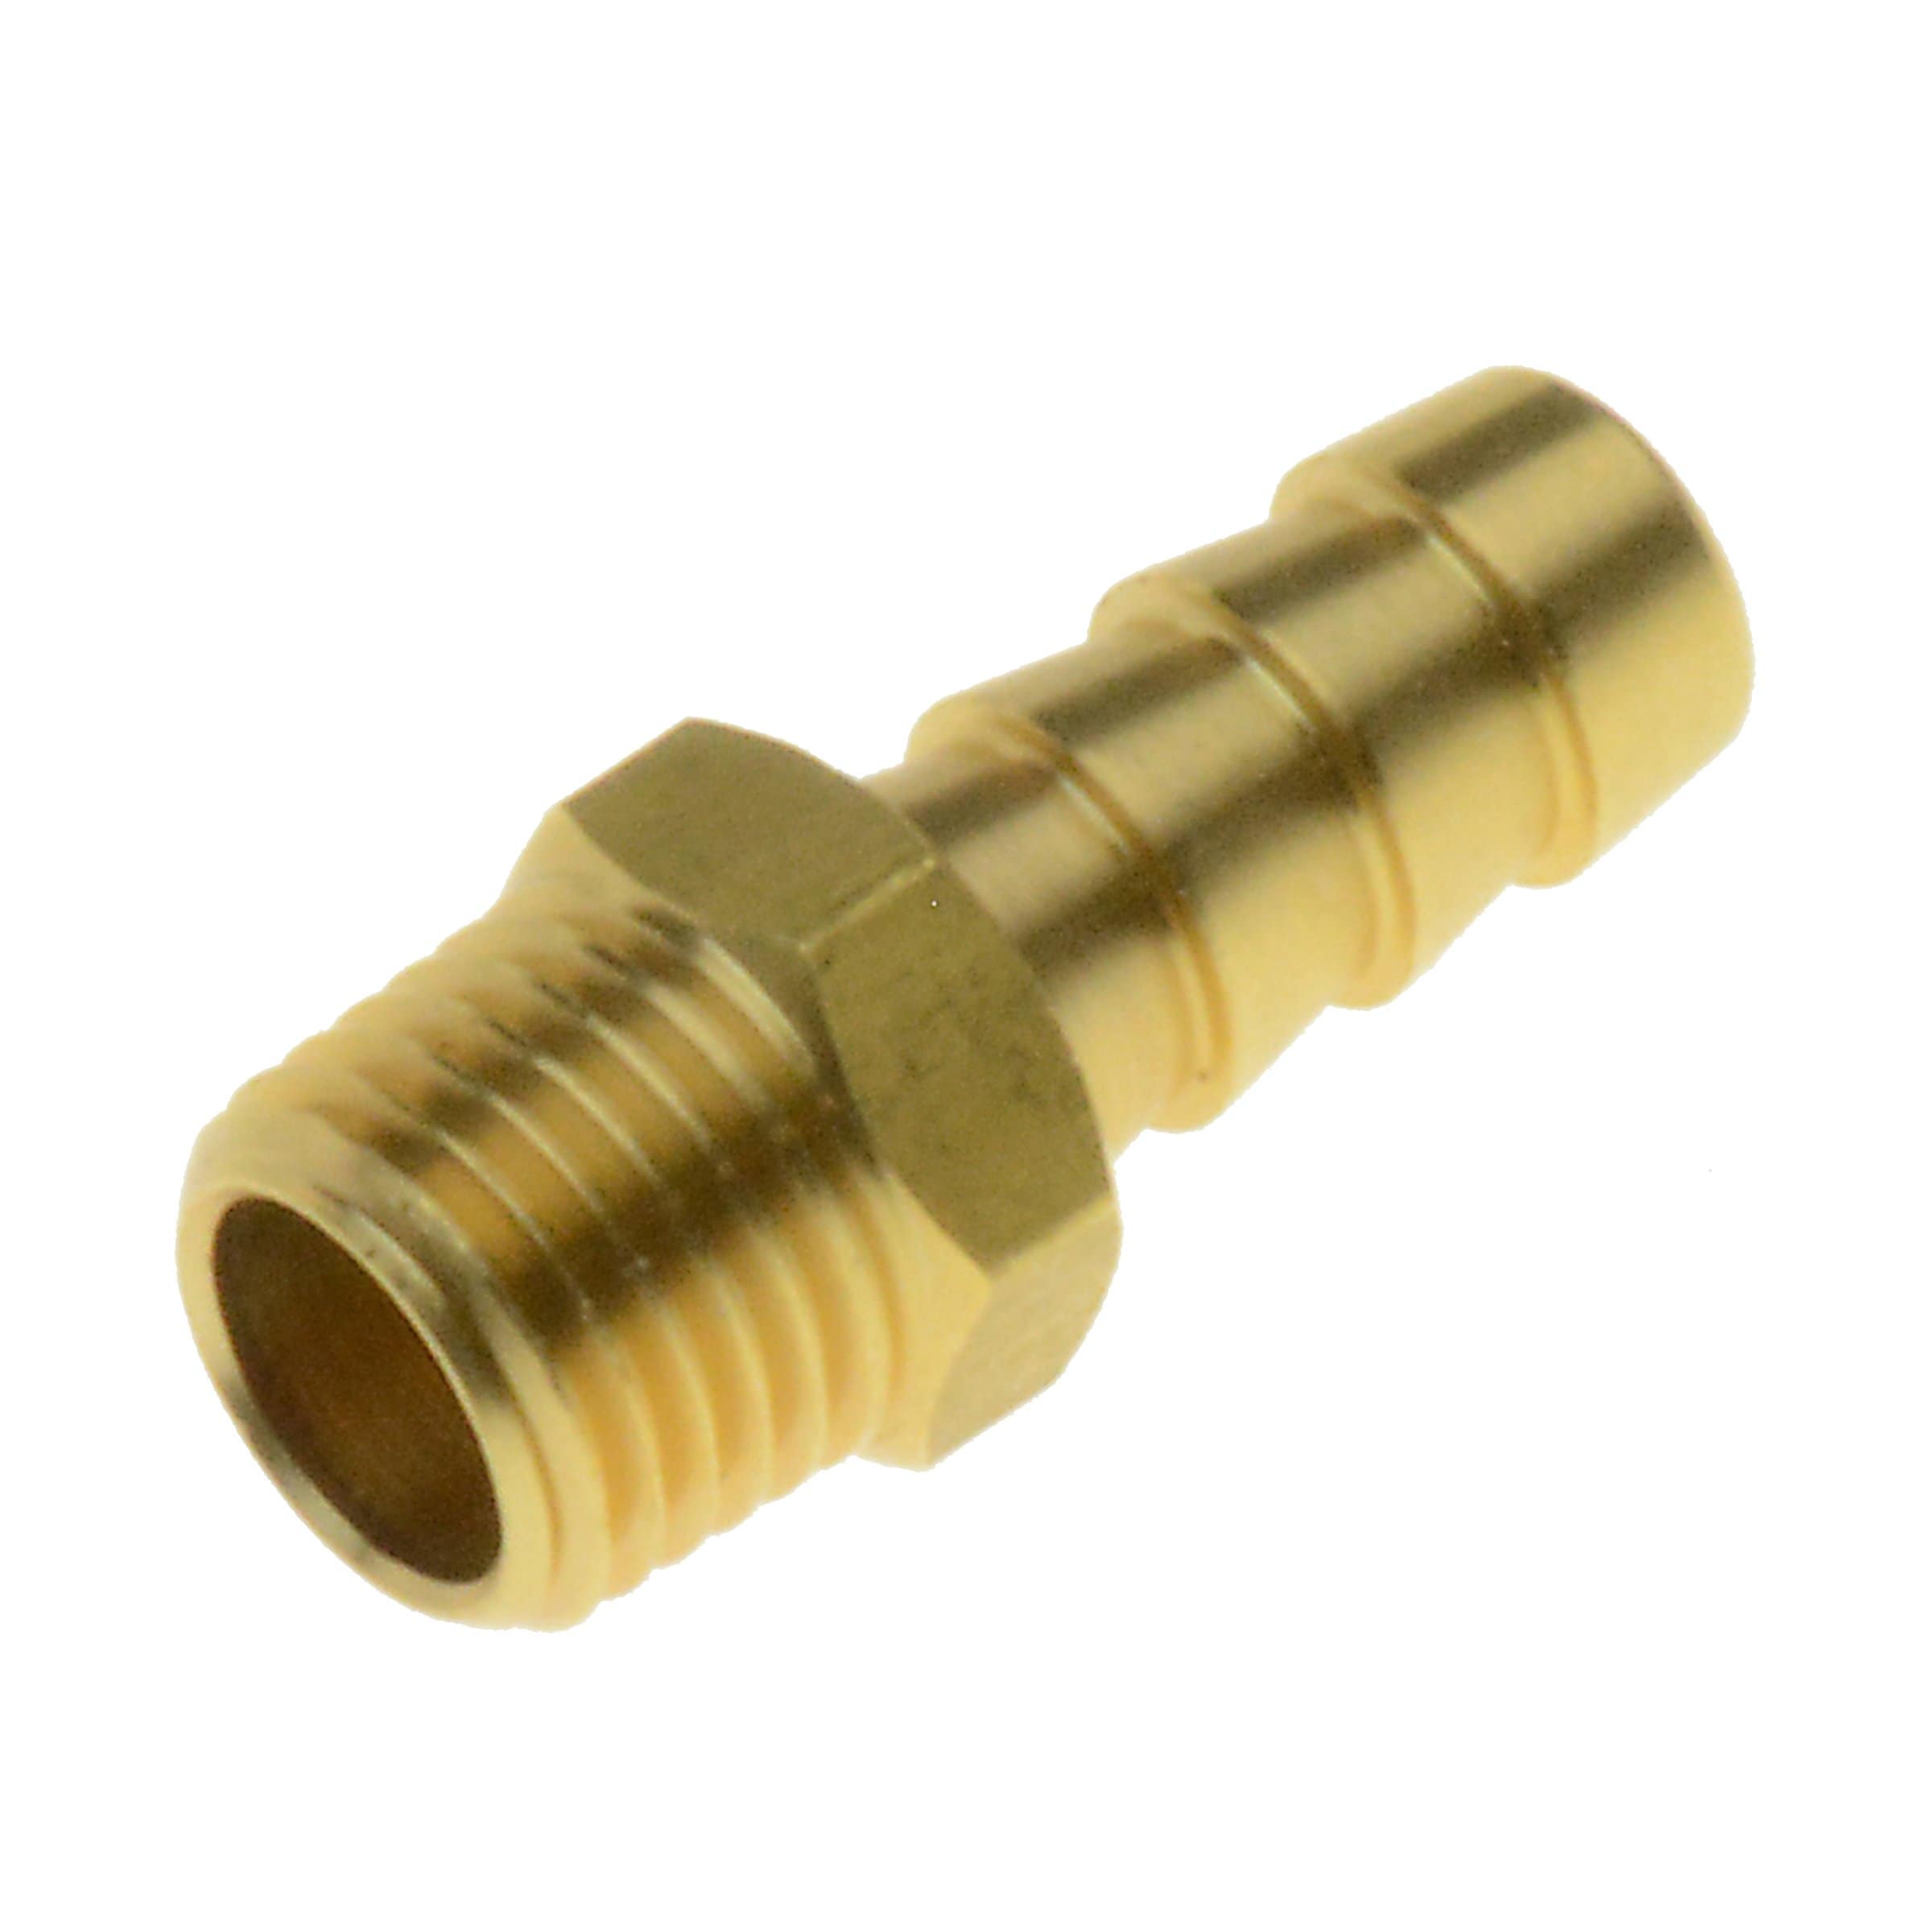 Boating Essentials™ Fuel Line Hose Barb Fitting - T-H Marine Supplies